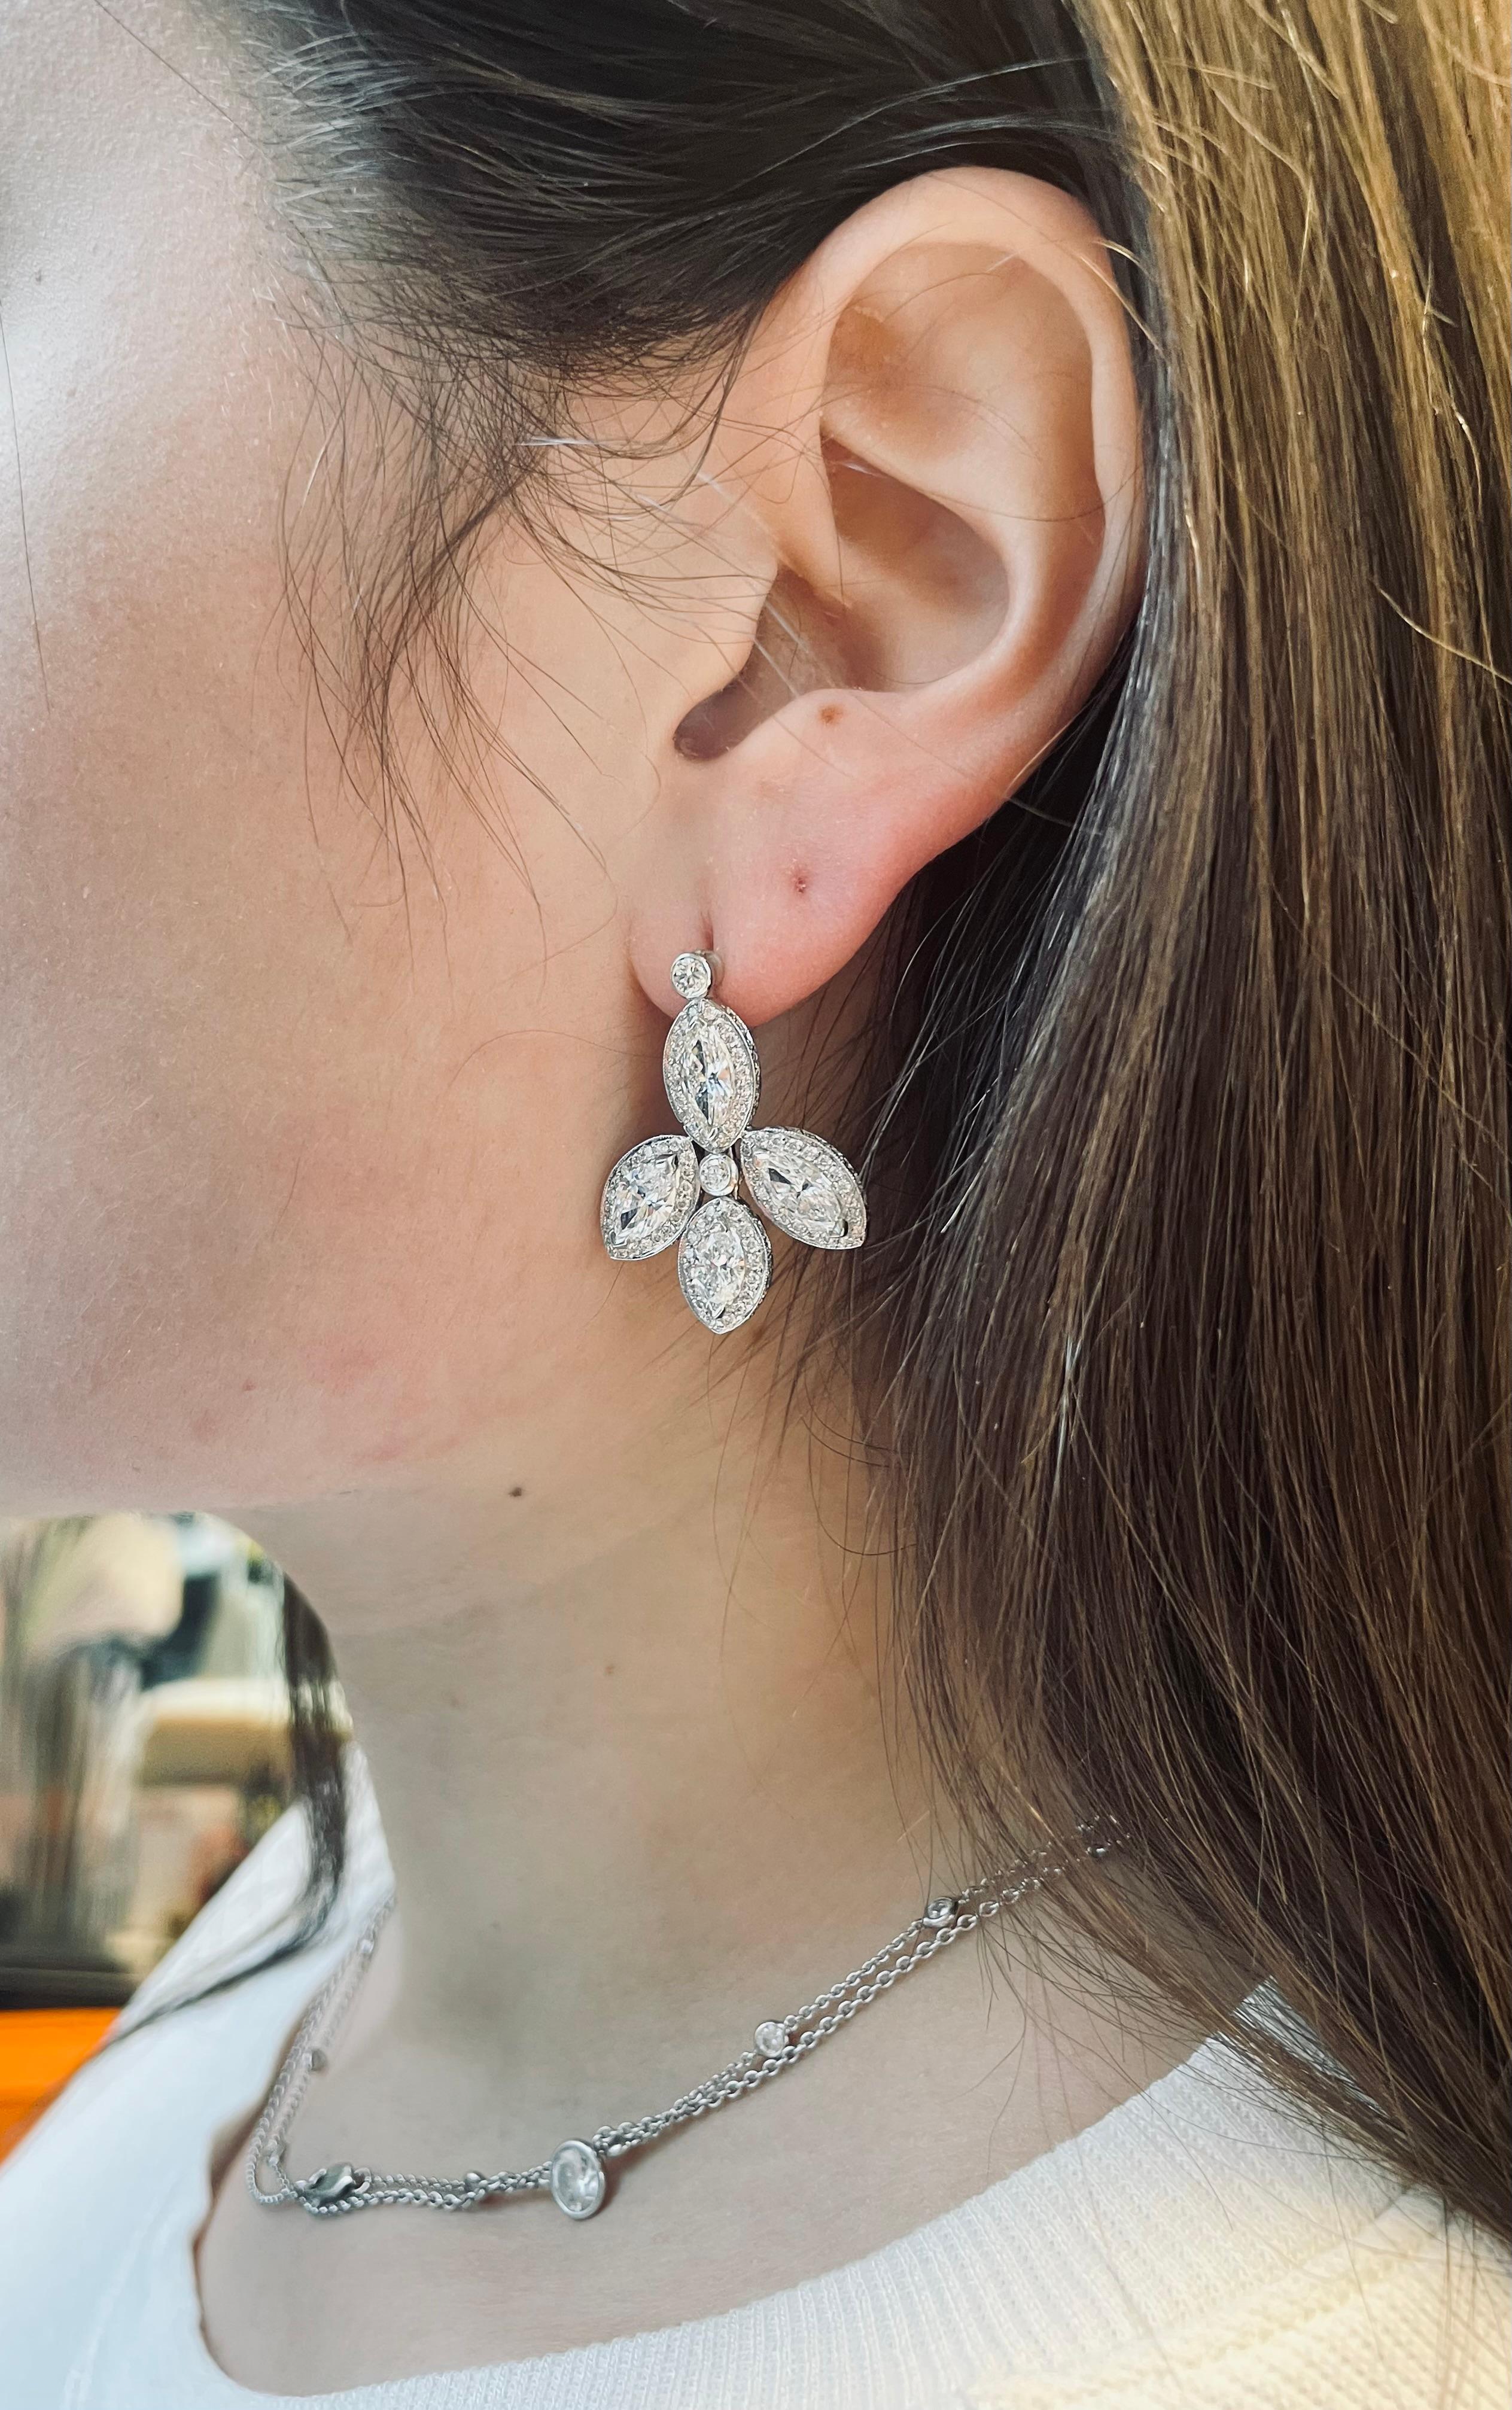 This beautiful set of leaf-themed diamond drop earrings features four marquise diamonds framed in micro-pave. The total weight of these earrings is approximately 7 carats. These flowery, dangling earrings are fun, but classic, and are made with